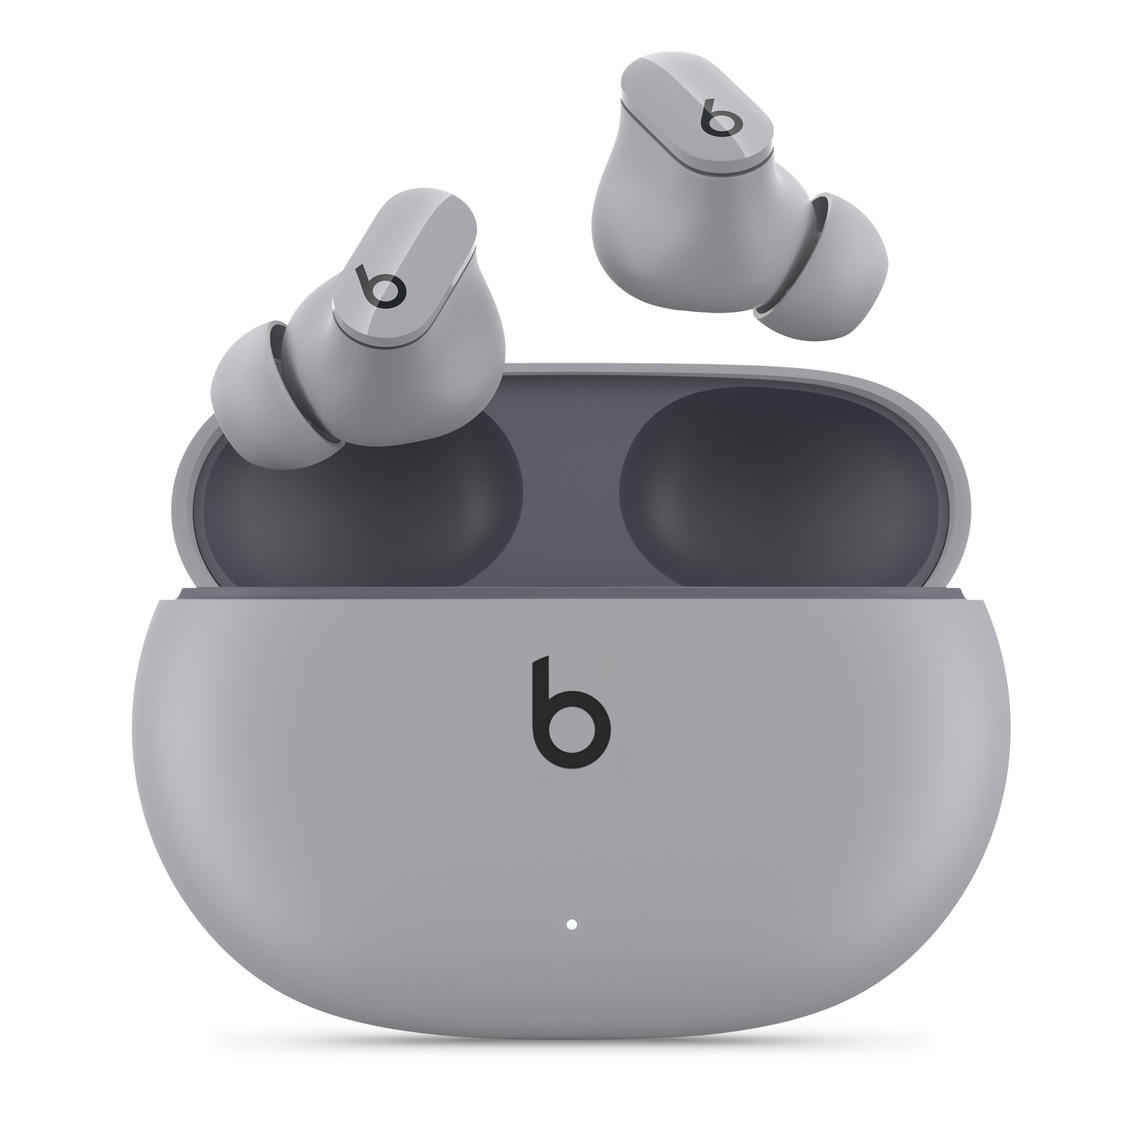 Earbuds for iPhone